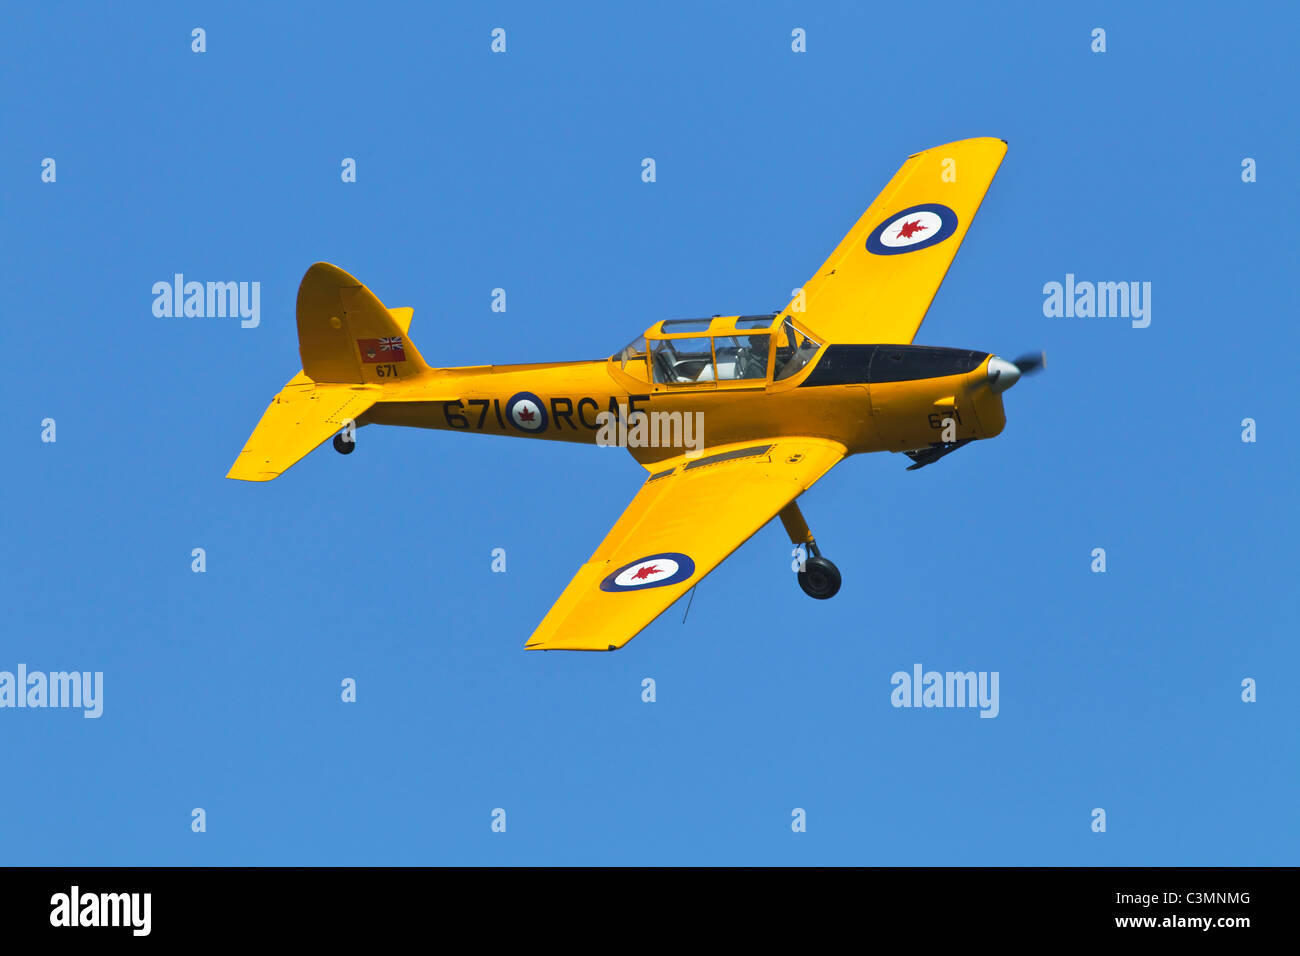 A De Havilland Canada DHC1 Chipmunk training aircraft of the RCAF - Royal Canadian Air Force Stock Photo